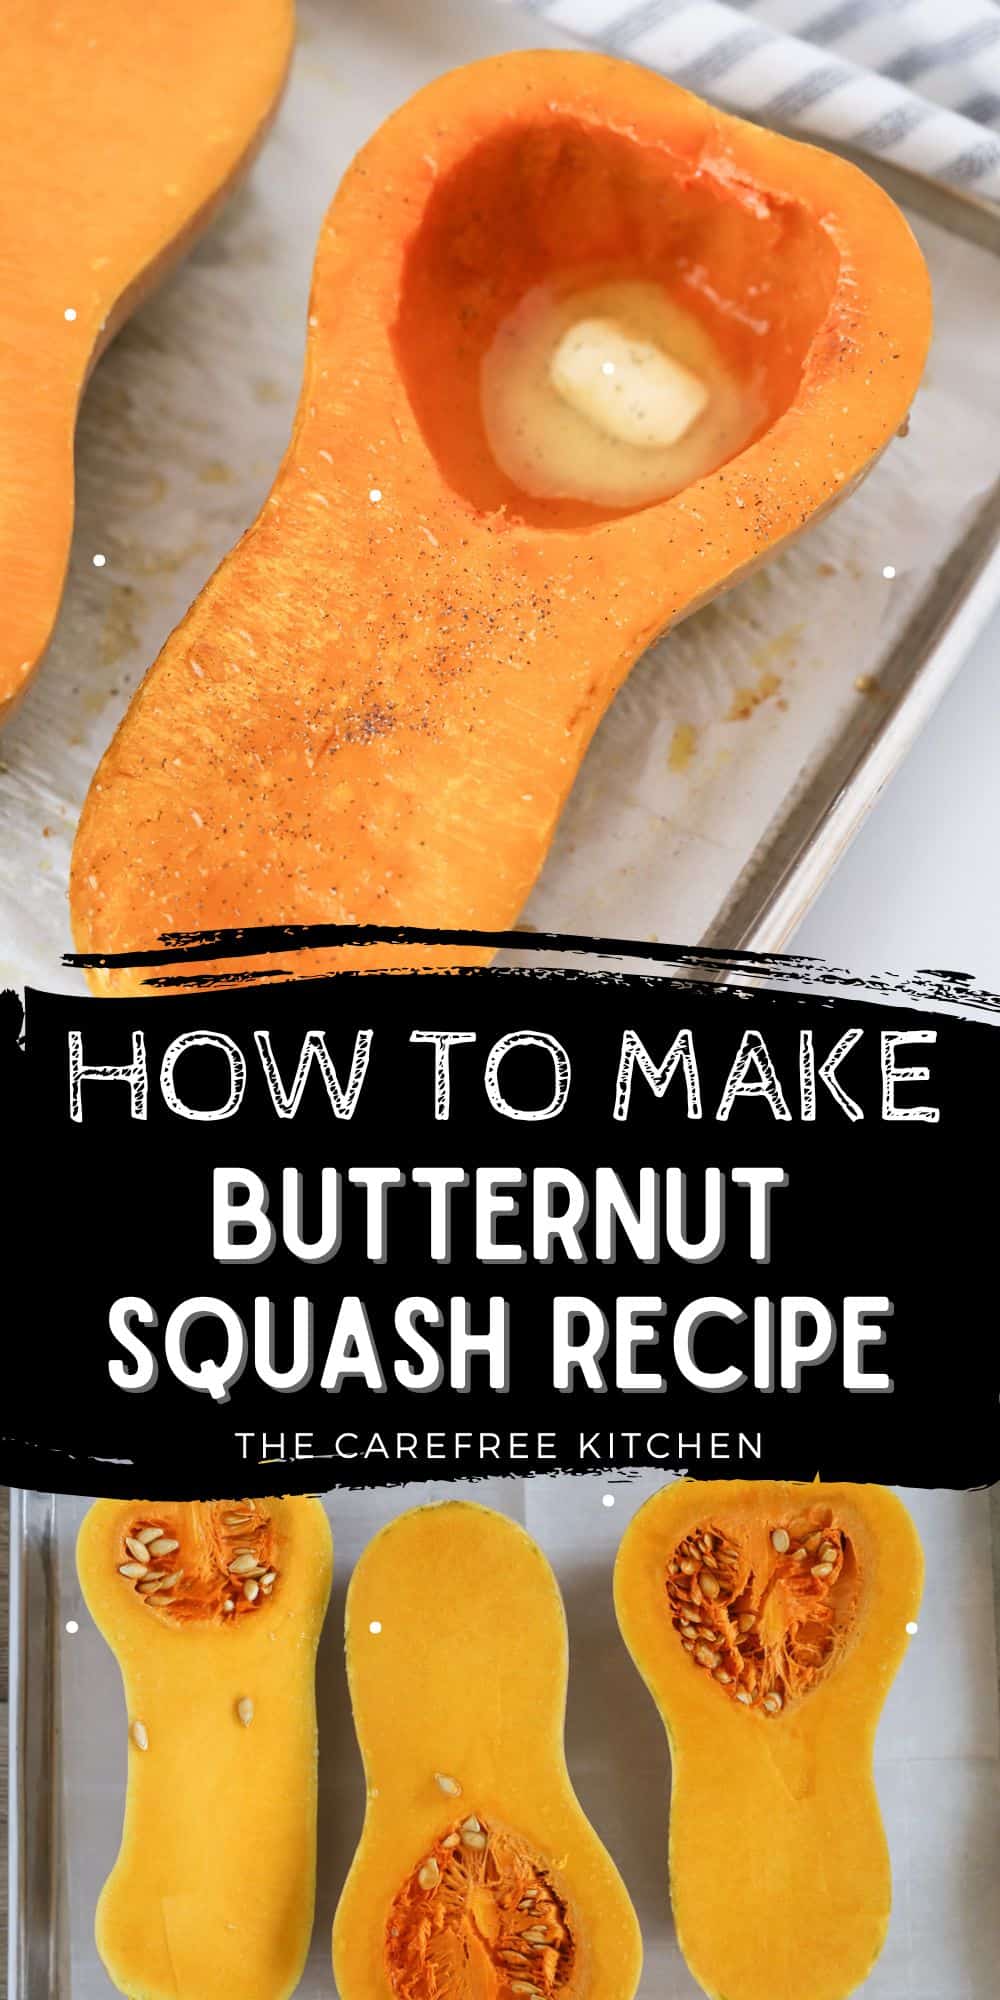 How to Roast Butternut Squash Whole - The Carefree Kitchen